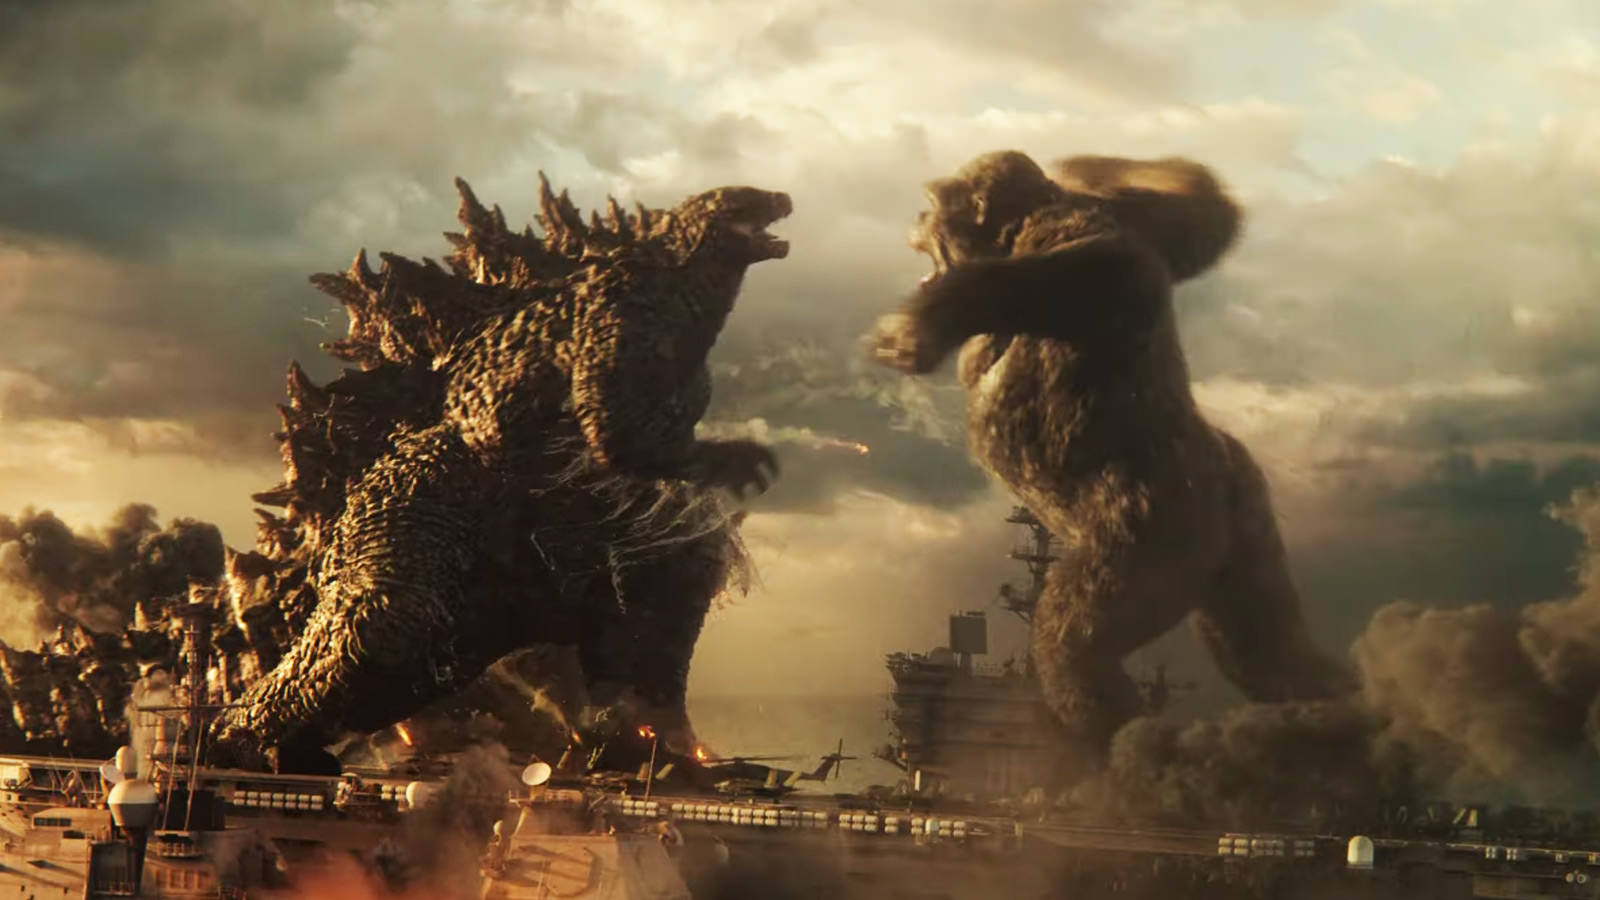 Godzilla Vs Kong Expands The Monsterverse In The Official Trailer | My